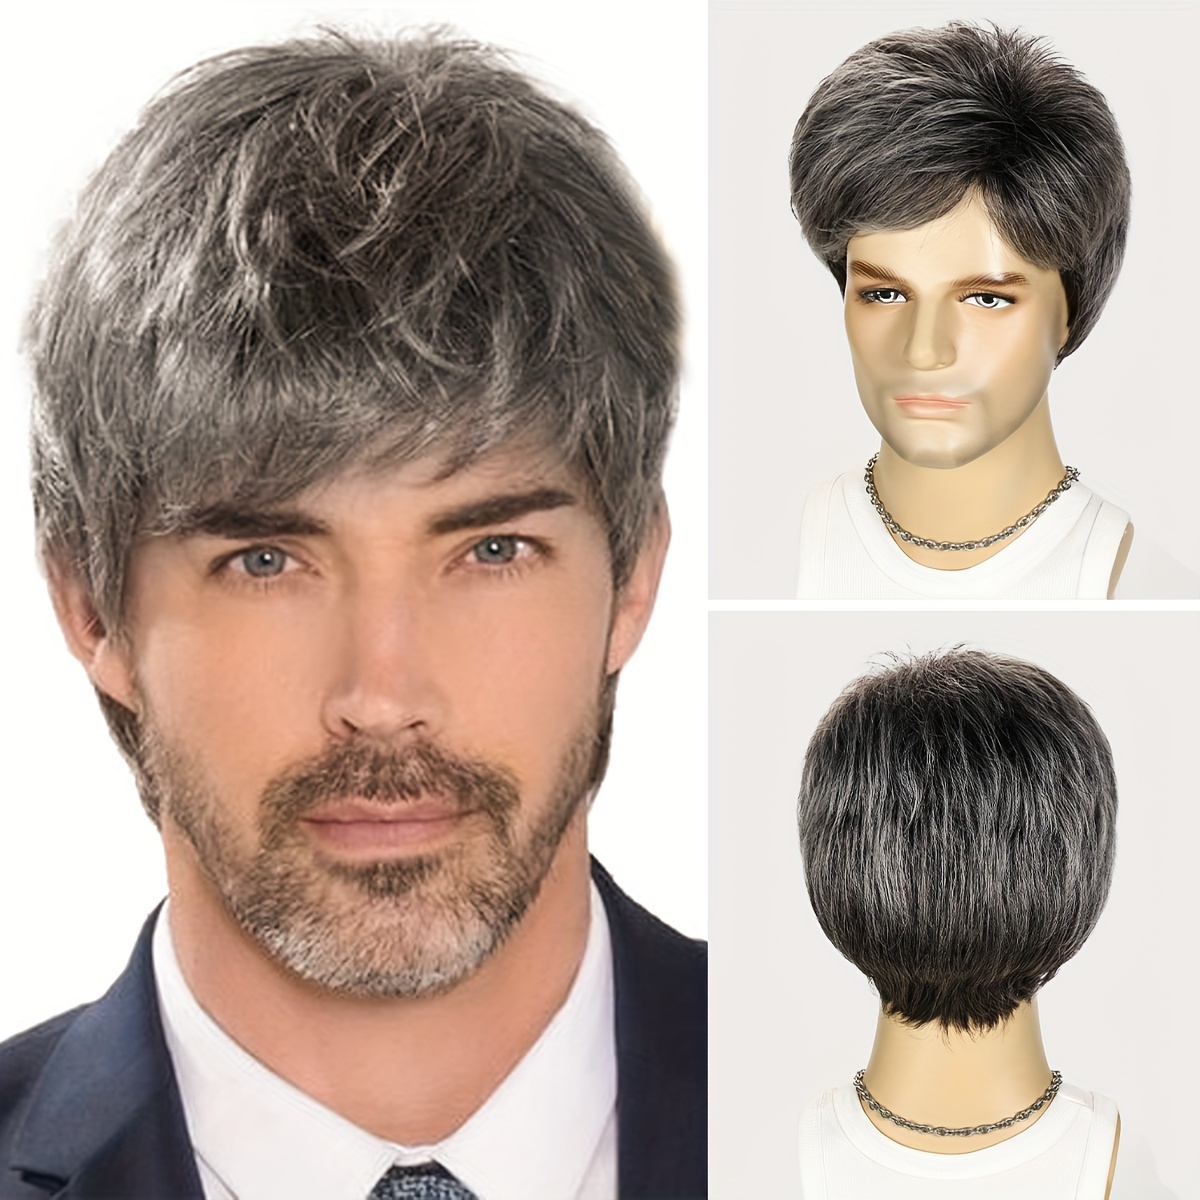 

Men's Short Grey Wig Layered Wigs Synthetic Heat Resistant Hair Replacement Wigs For Male Guys - Perfect For Daily Costume Parties & Halloween!